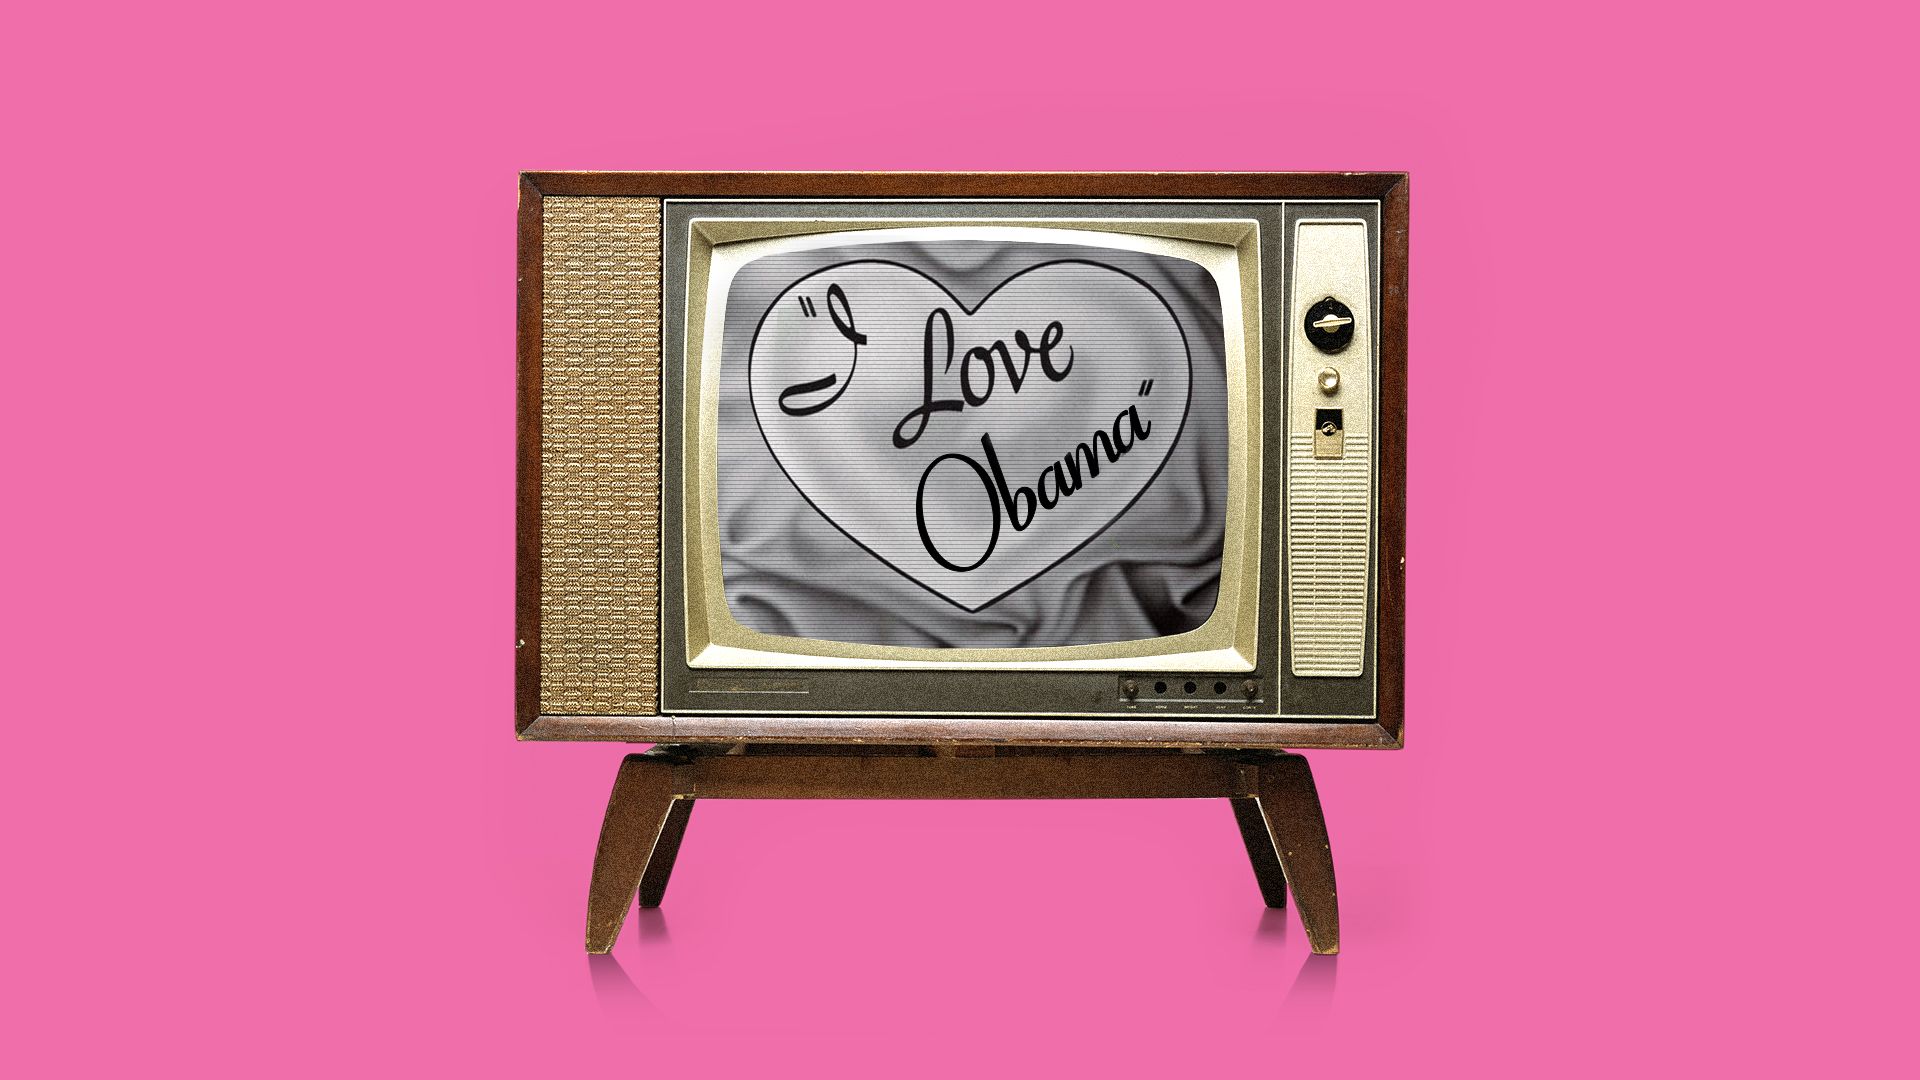 Illustration of an old television with "I Love Obama" on the screen looking like the "I Love Lucy" logo